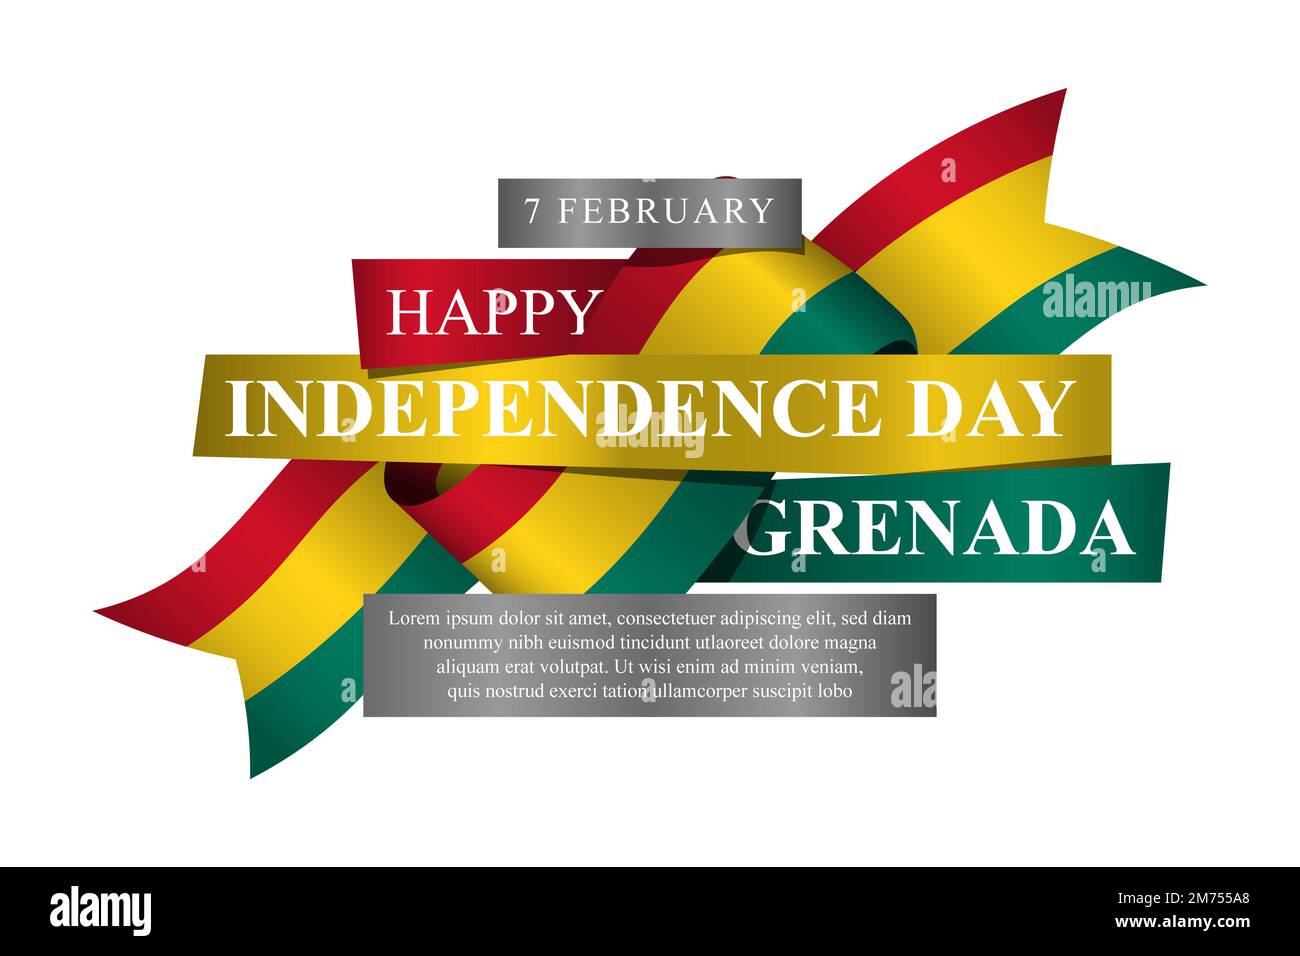 Independence Day Grenada background. Vector illustration. Stock Photo